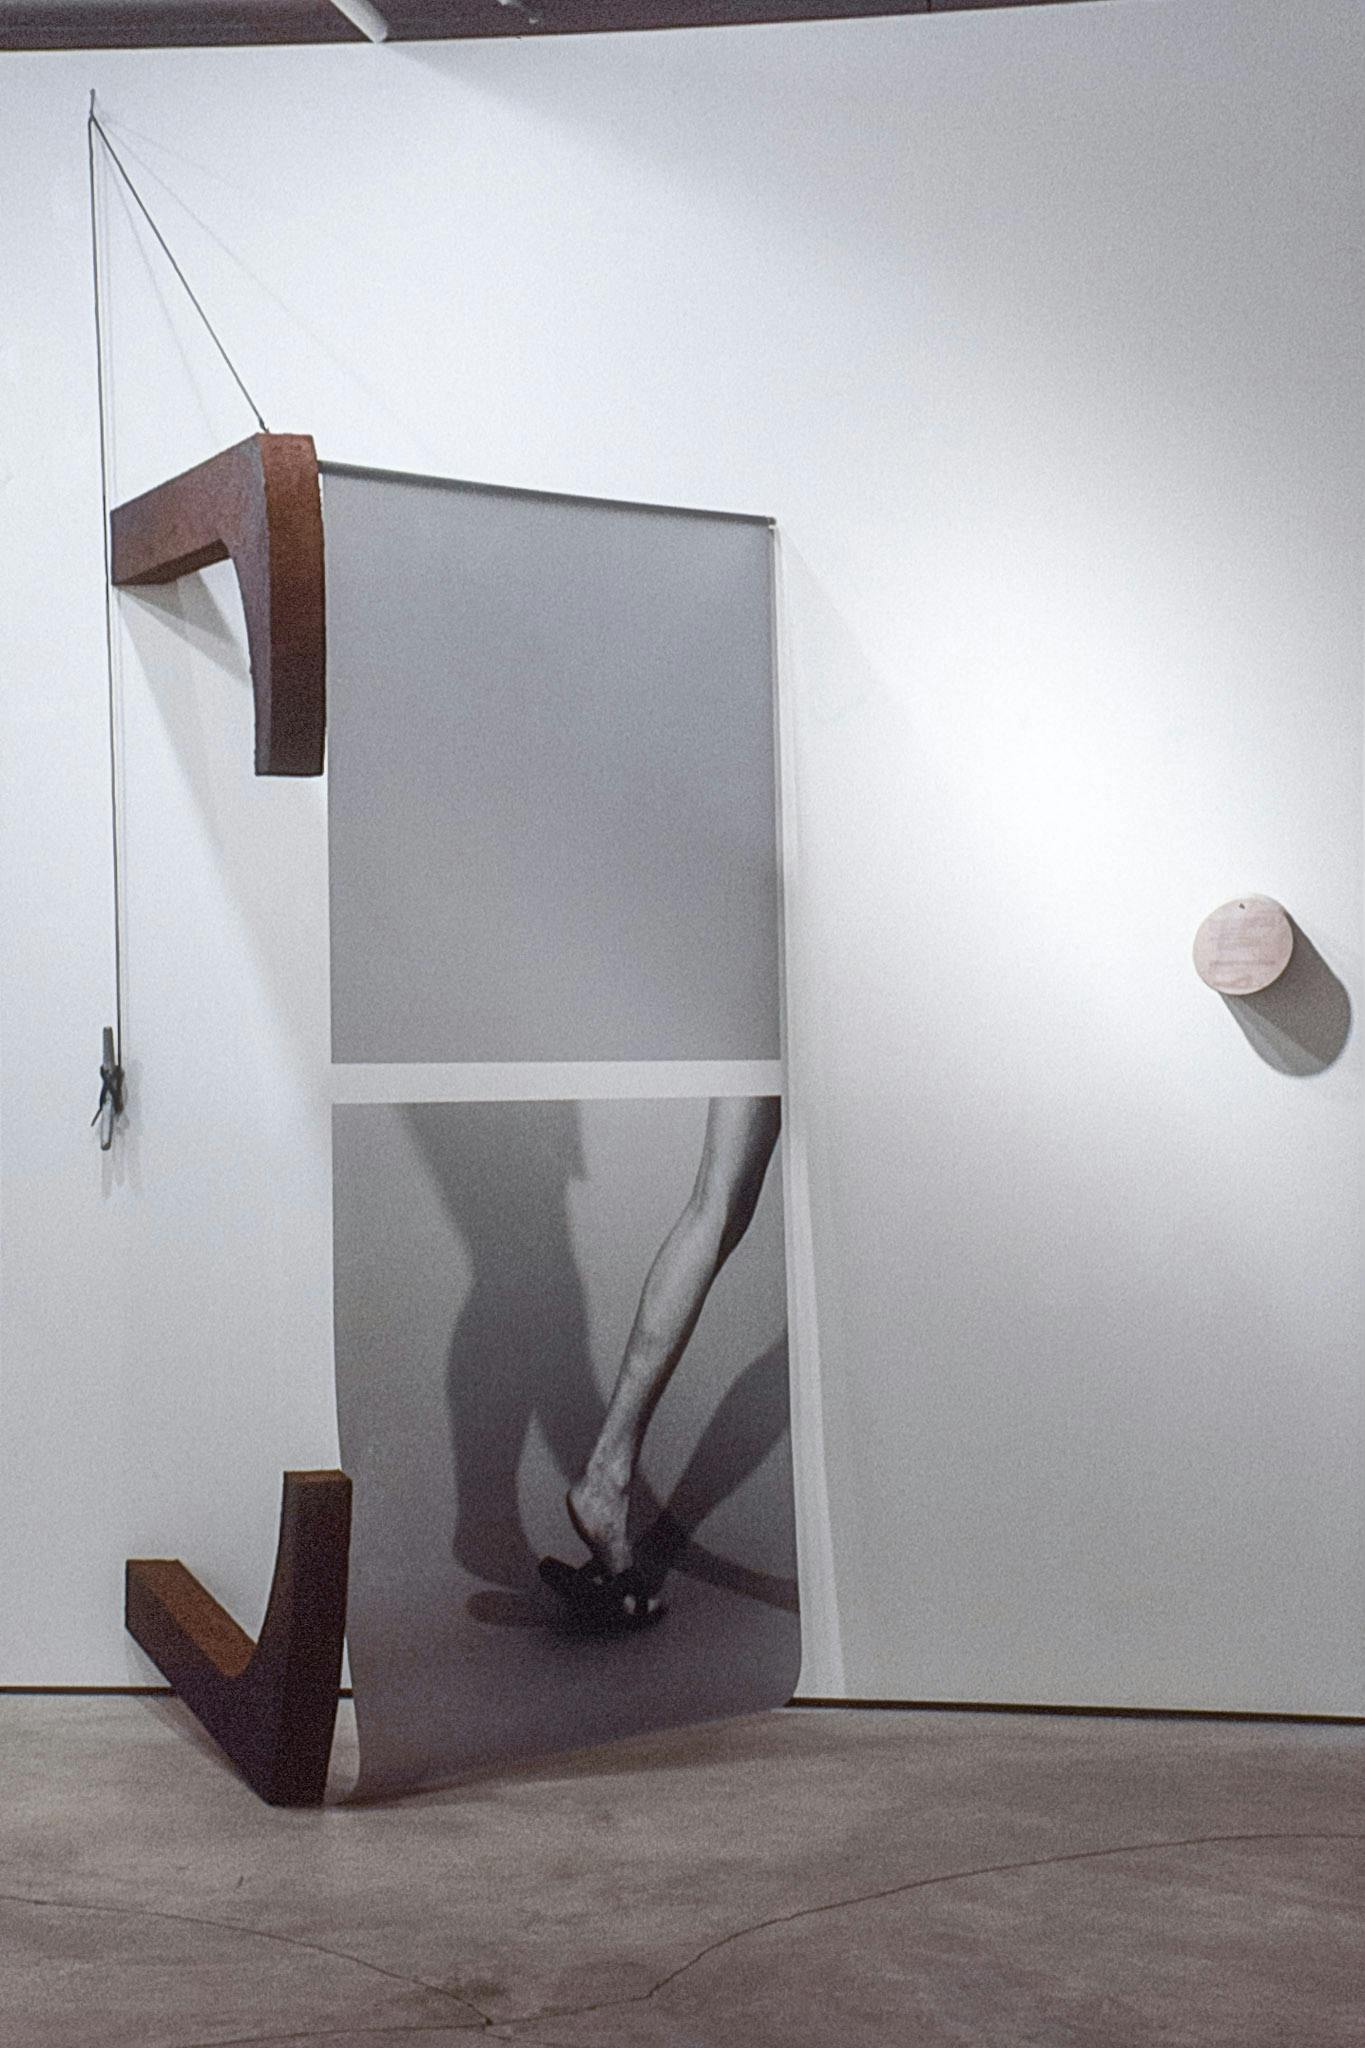 Two artworks mounted on a wall. One consists of two wooden pieces which suspend a large photo printed on mylar. A small stack of round, pink sheets hangs from a small metal rod in the wall.